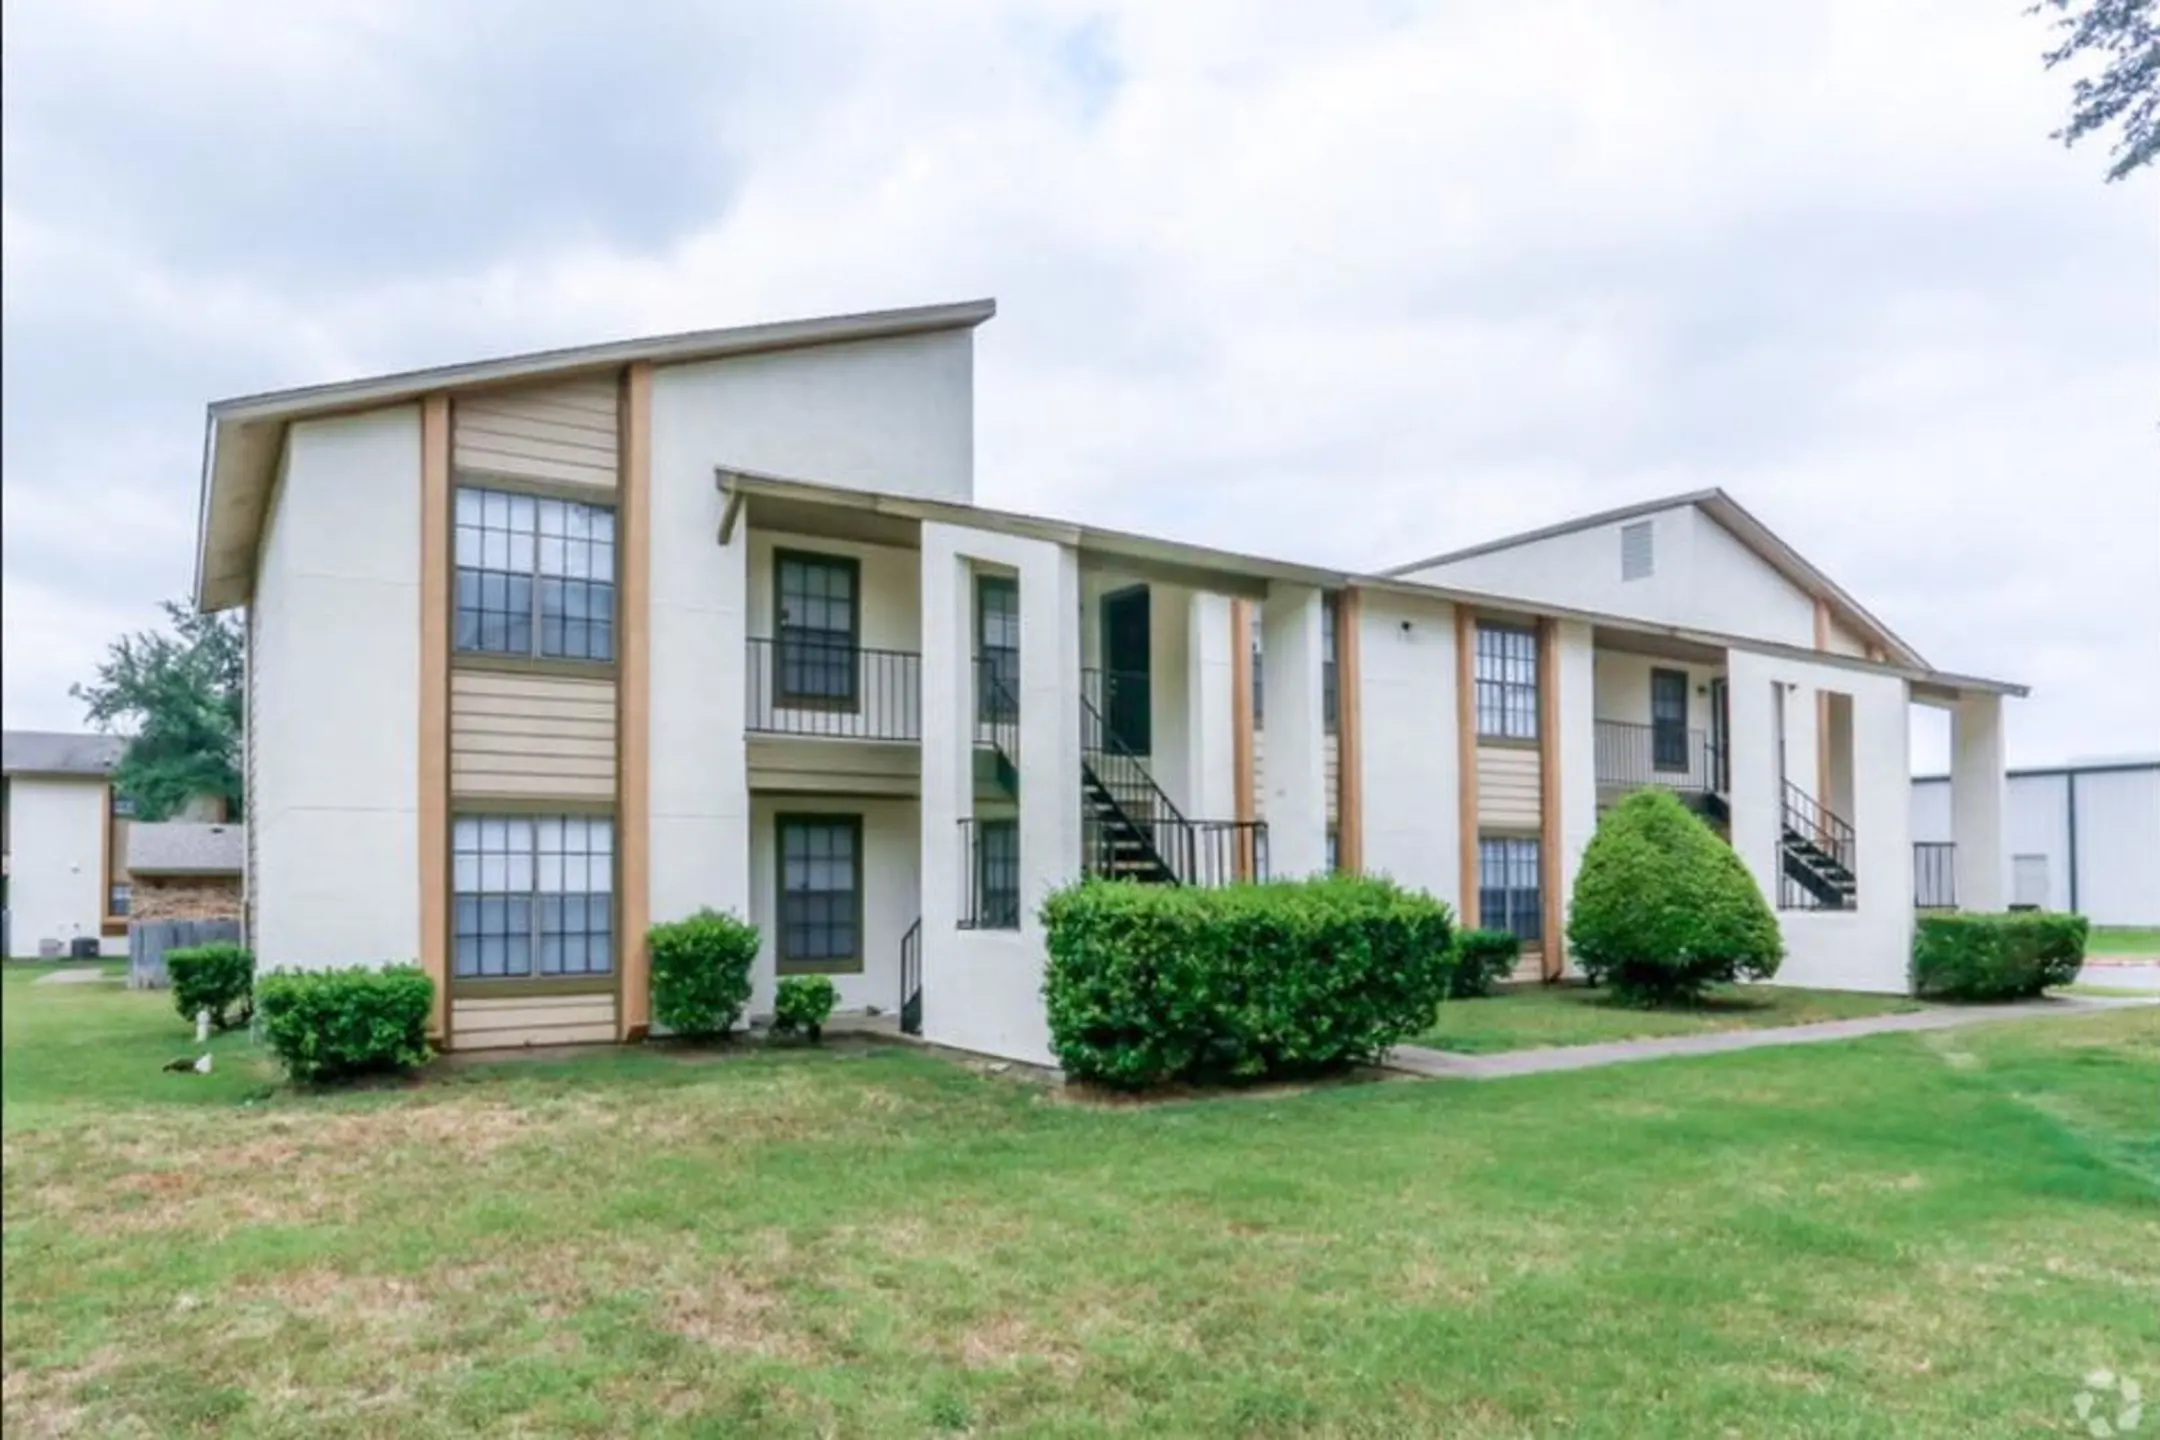 Building - Colony Apartments - Woodway, TX